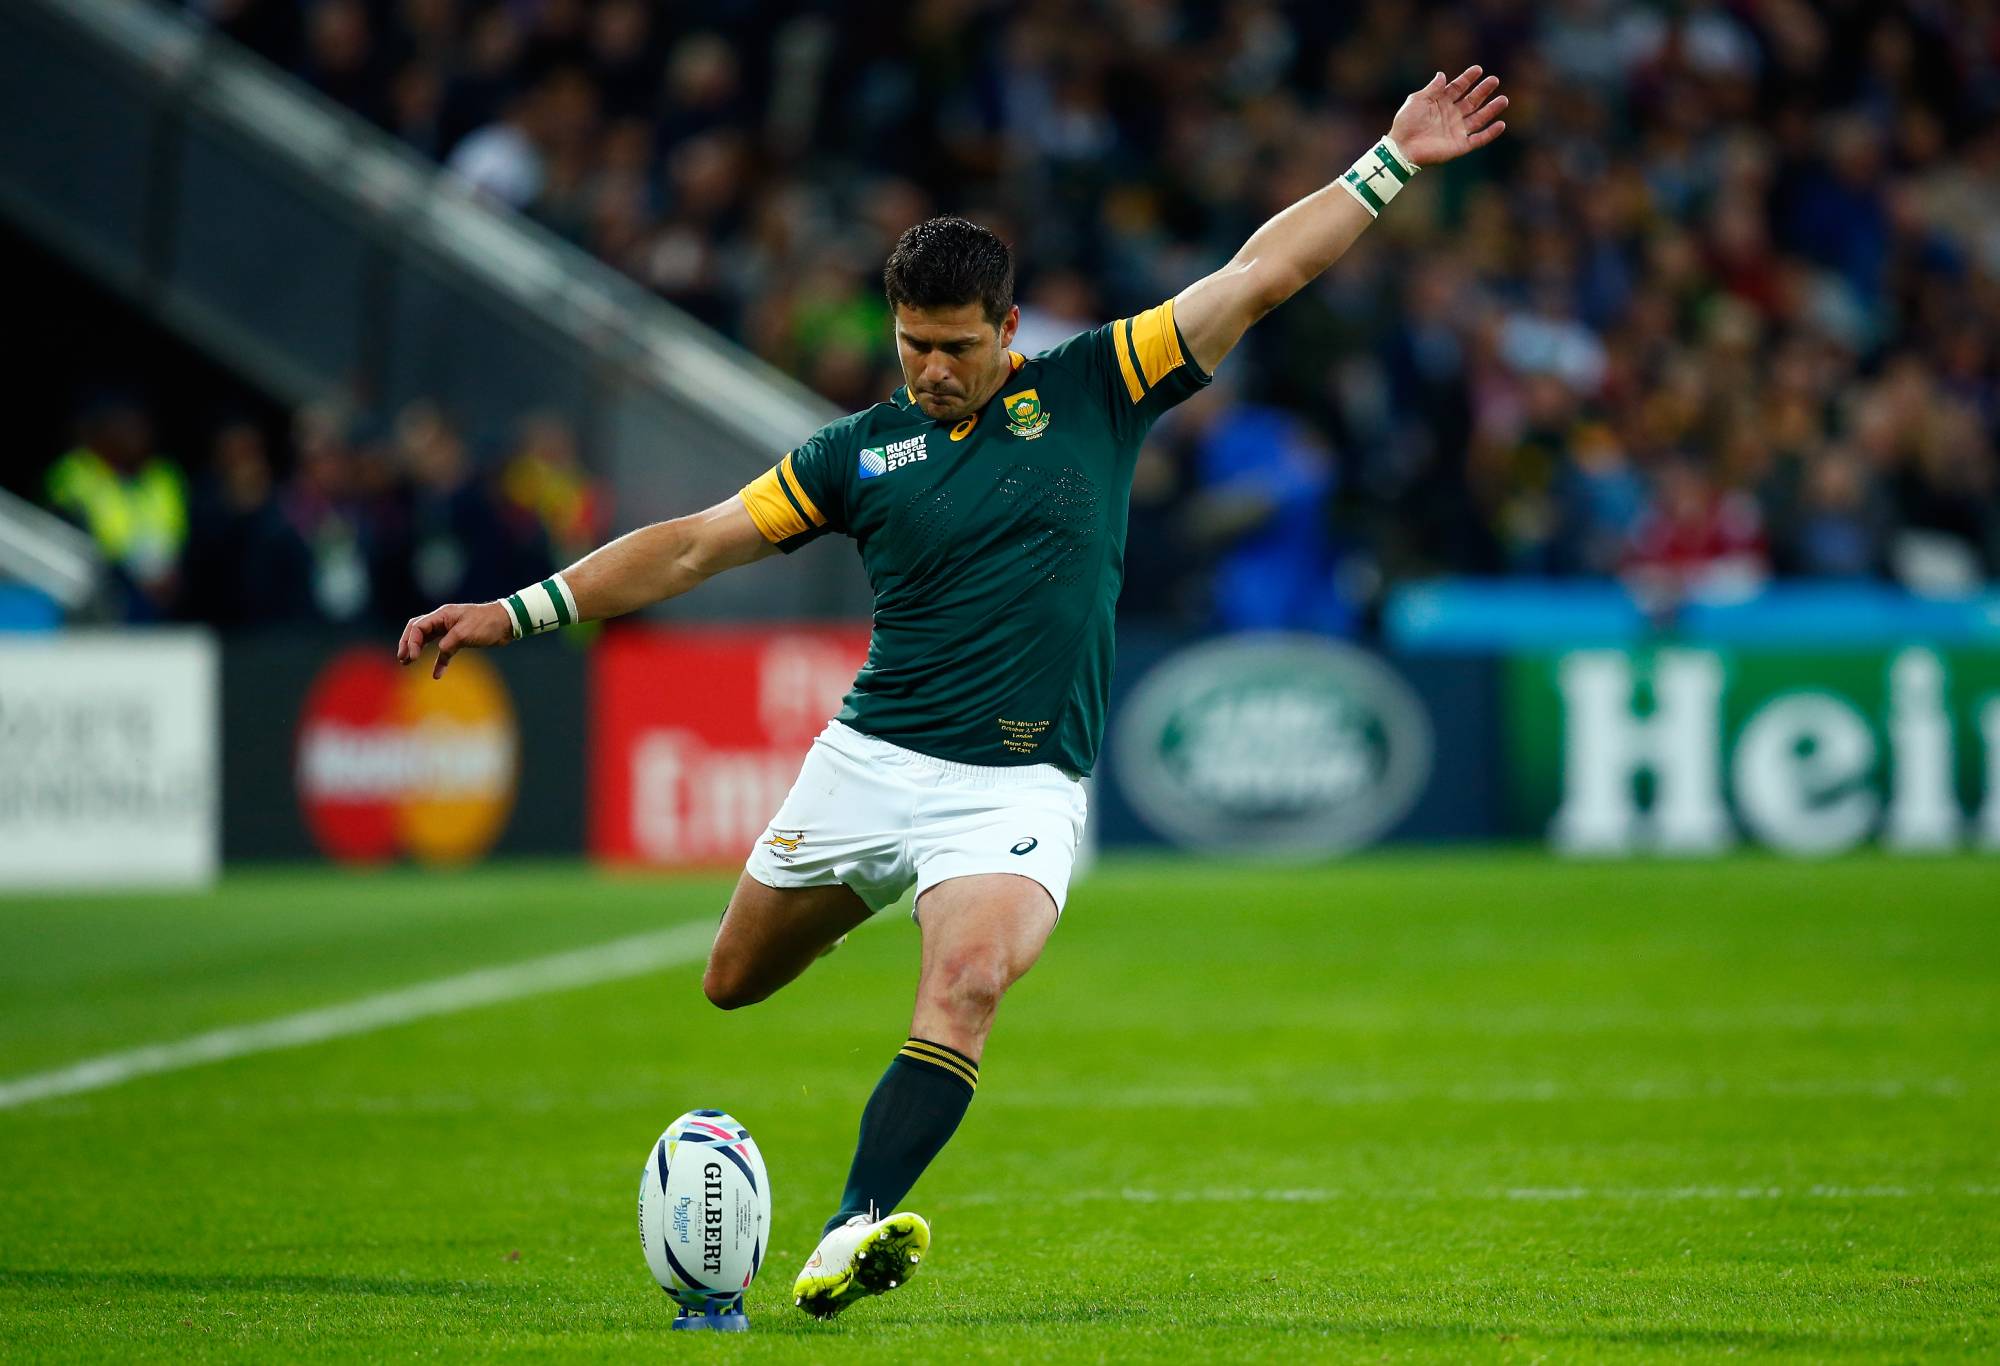 Morne Steyn of South Africa kicks at goal during the 2015 Rugby World Cup Pool B match between South Africa and USA at the Olympic Stadium on October 7, 2015 in London, United Kingdom. (Photo by Mike Hewitt/Getty Images)